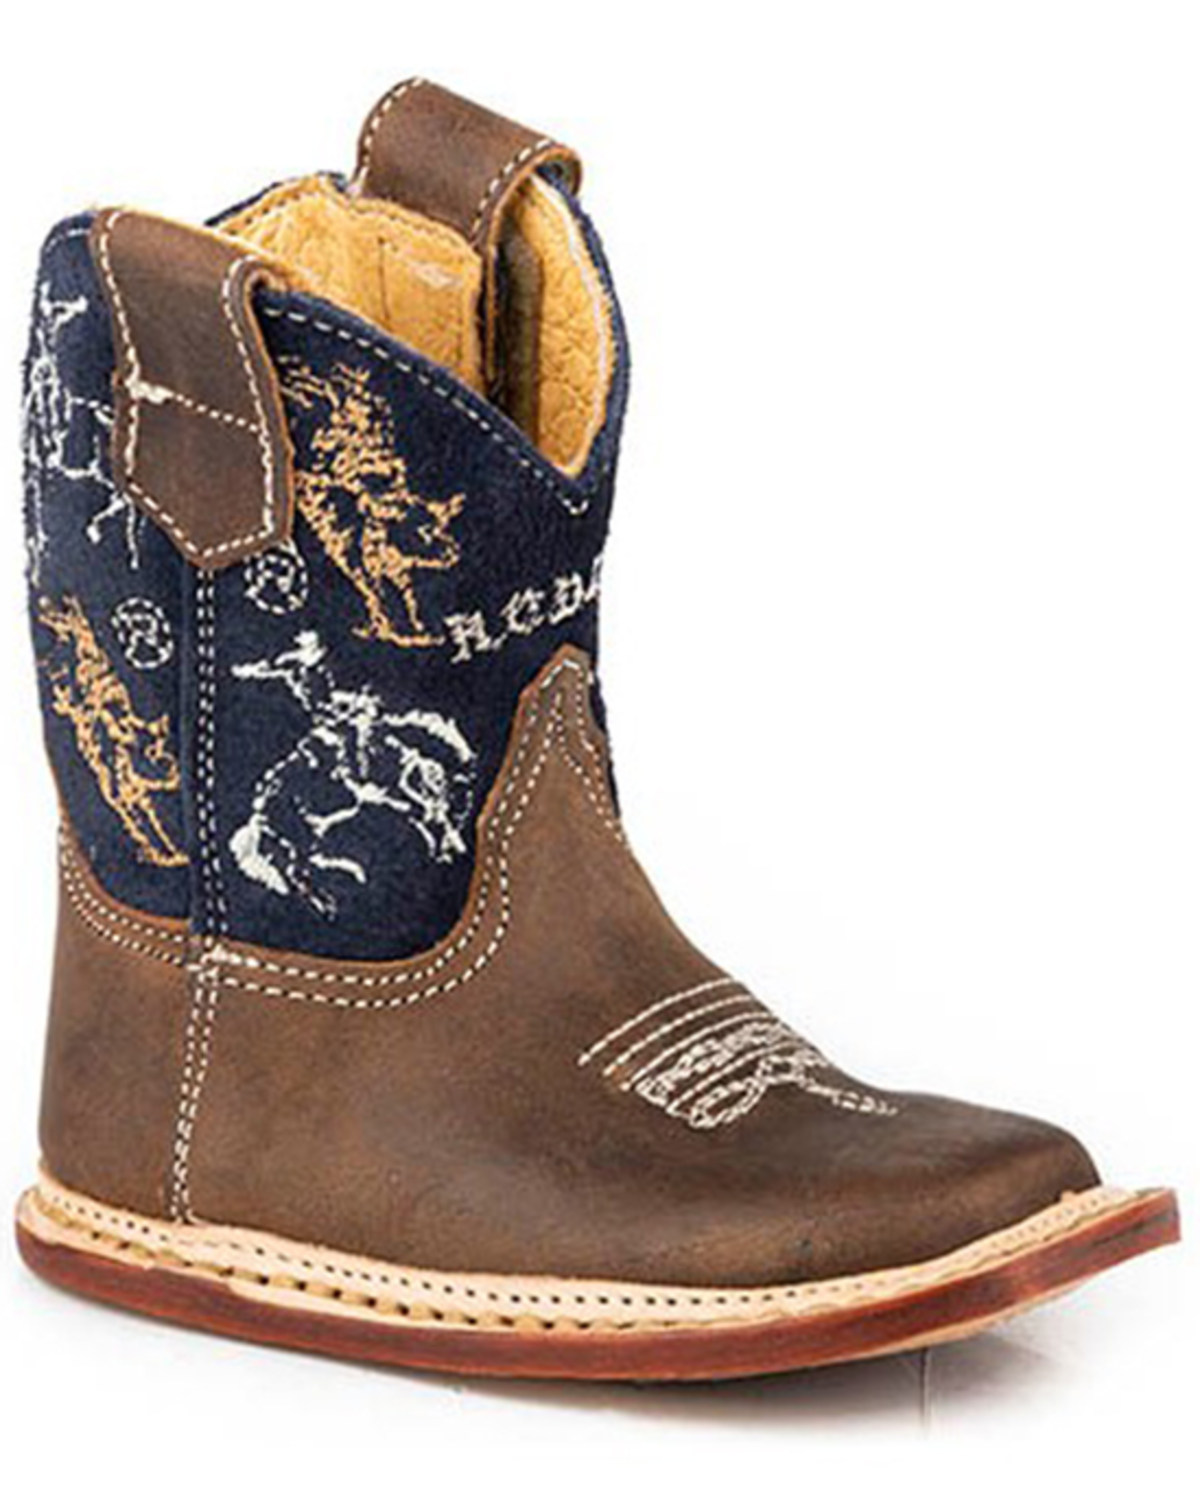 Roper Infant Boys' Rough Stock Western Boots - Broad Square Toe